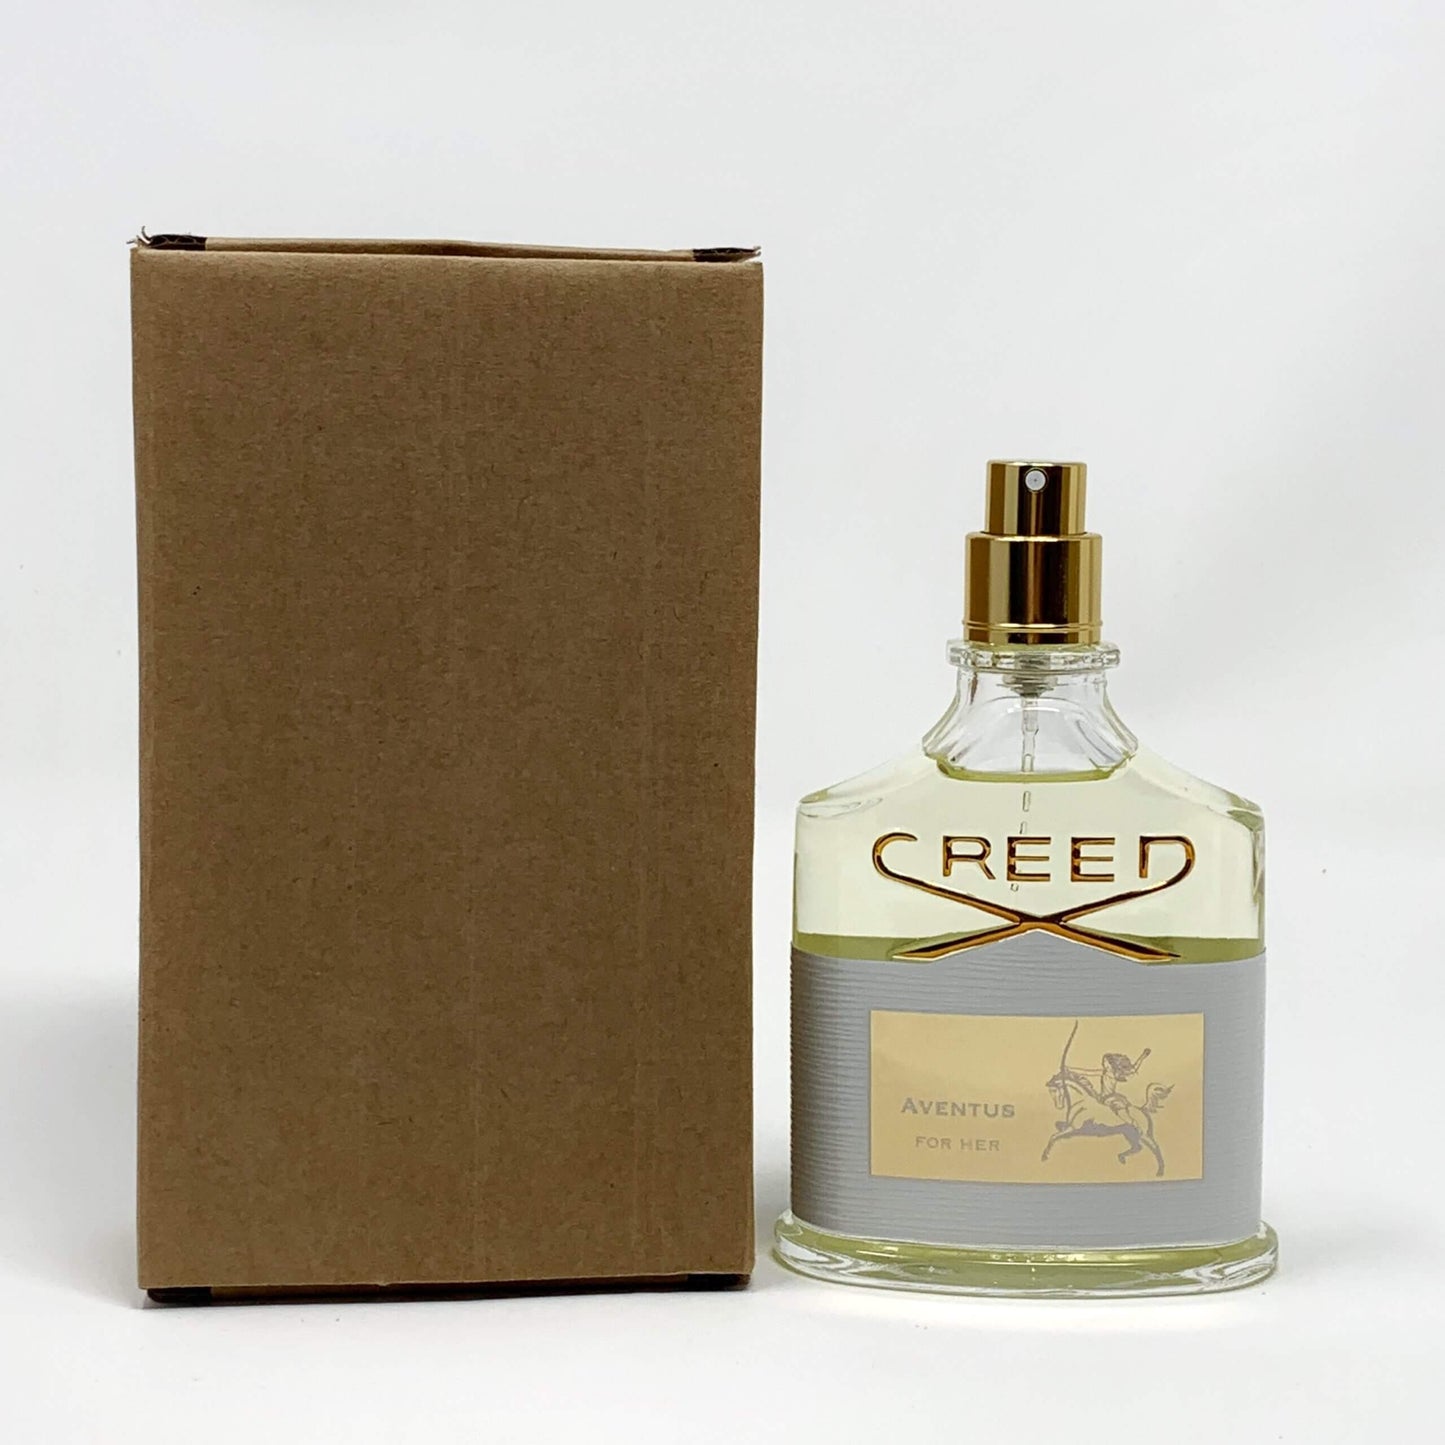 Creed - Aventus for Her.